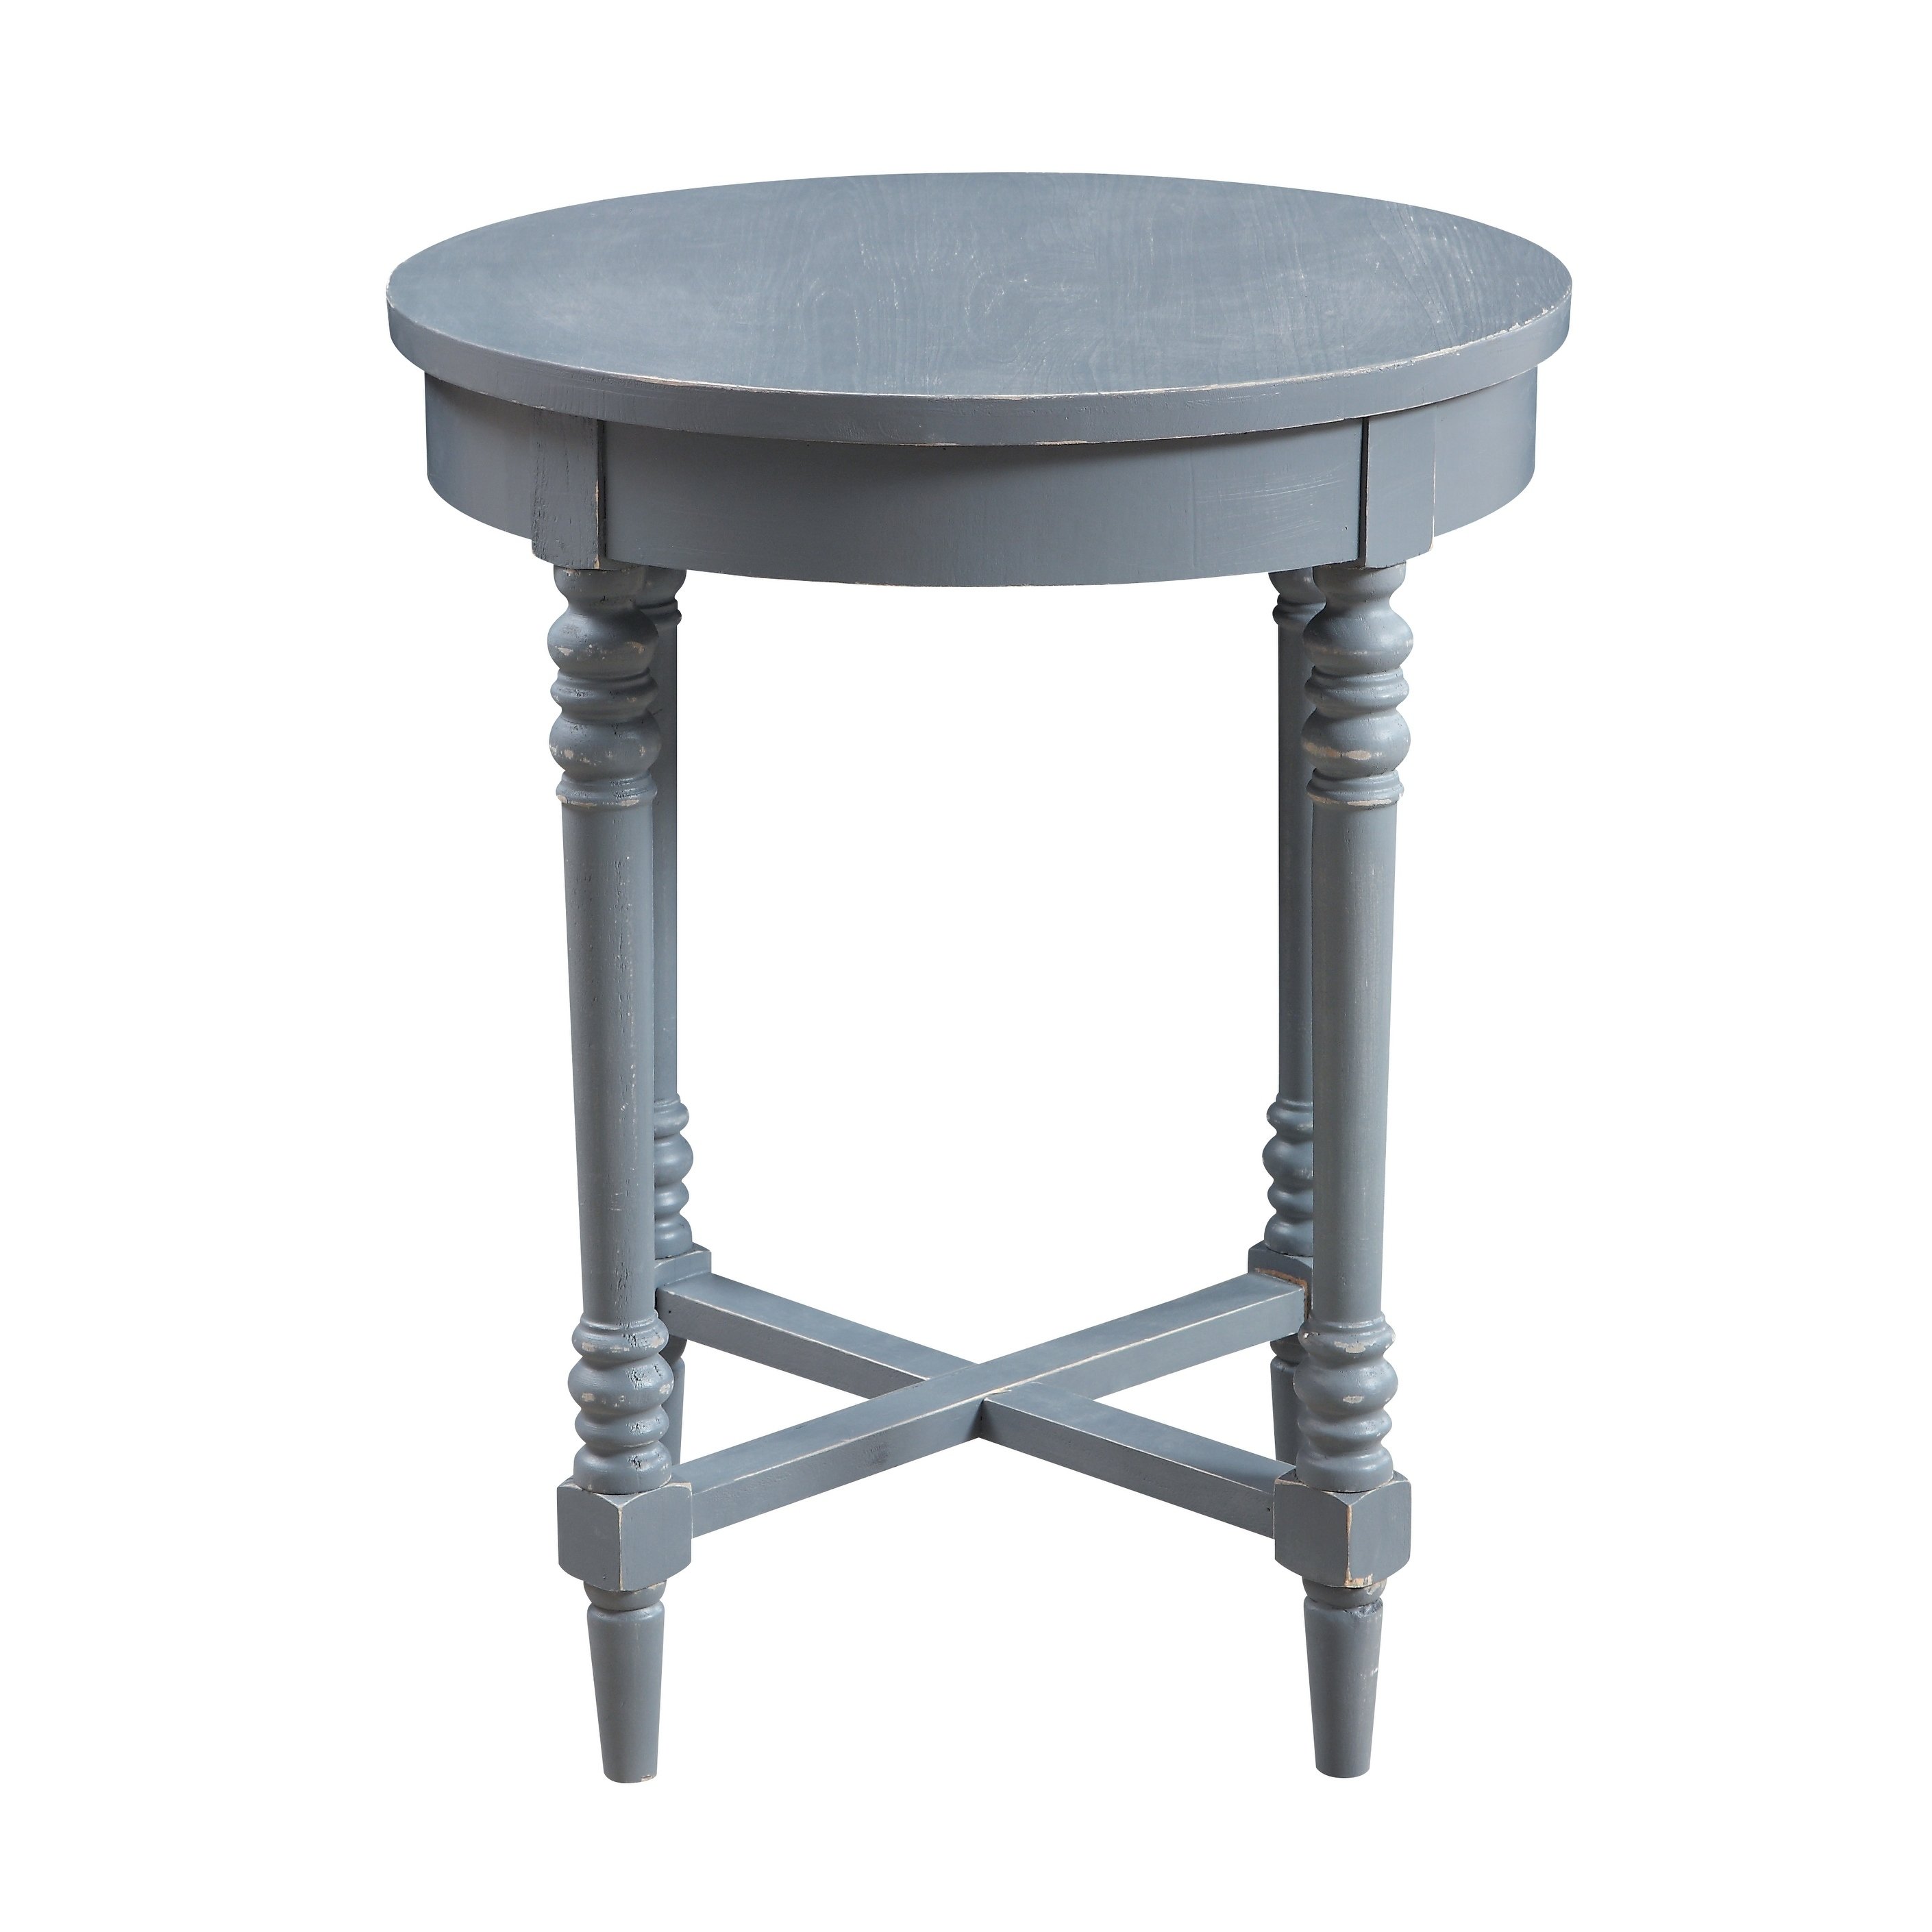 treasure trove small accent table free shipping today grey charging side ginger jar lamps green porcelain quality bedroom furniture luxury mango bookcase round tablecloth console